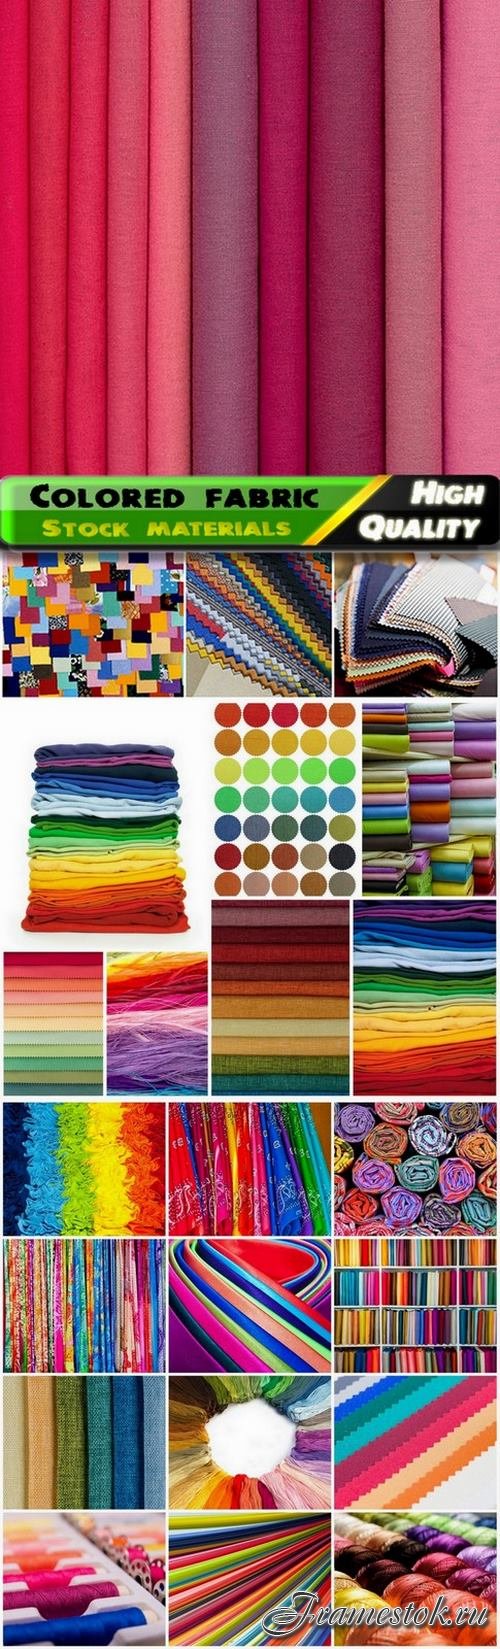 Colored fabric and thread - 23 HQ Jpg